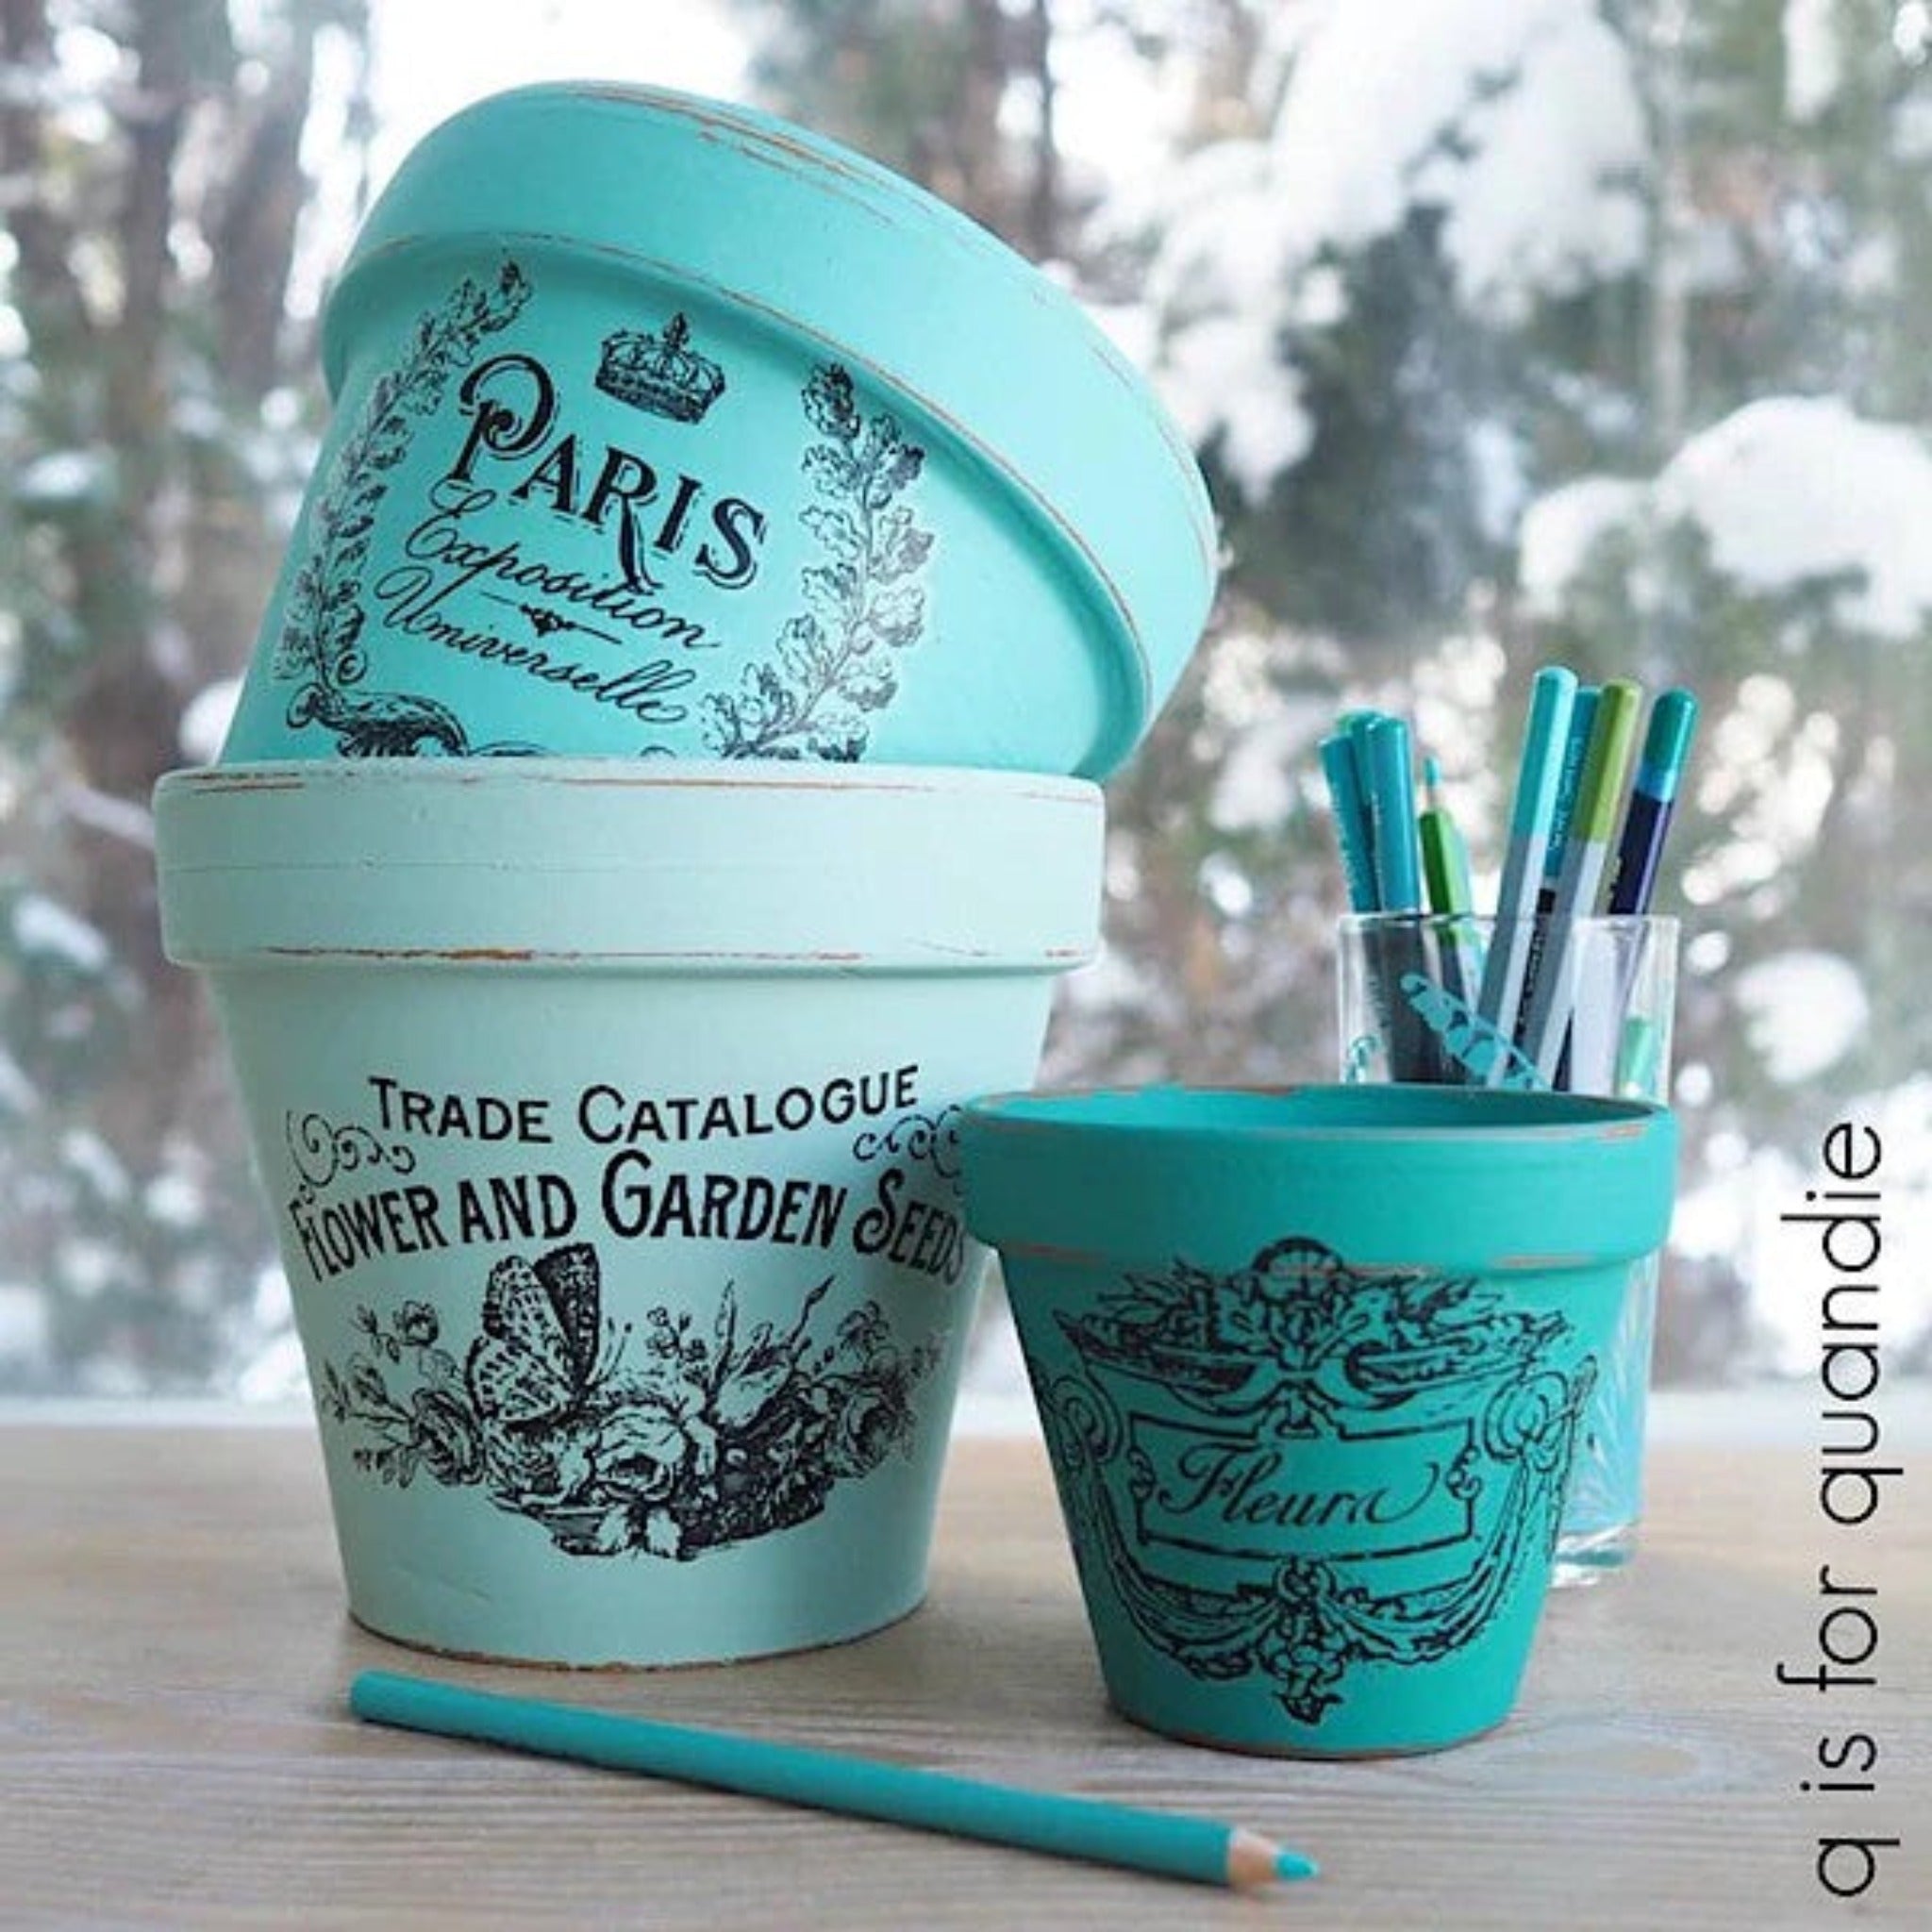 Three terra cotta clay pots refurbished by Q if for Quandie are painted teal and feature ReDesign with Prima's Classic Vintage Labels transfer on them.